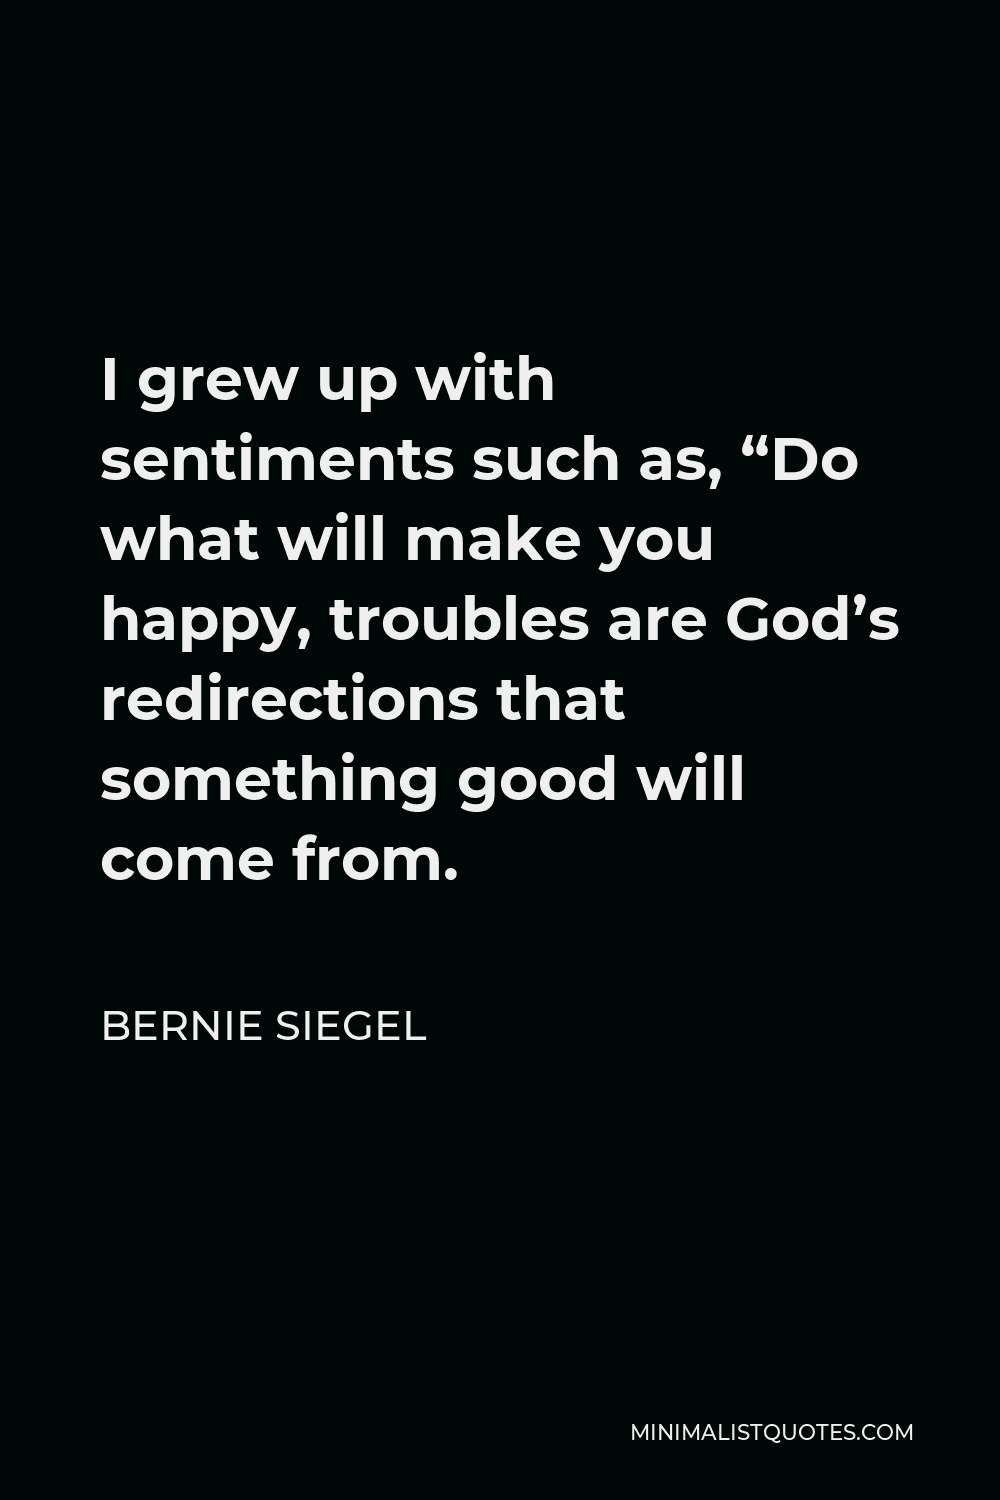 Bernie Siegel Quote - I grew up with sentiments such as, “Do what will make you happy, troubles are God’s redirections that something good will come from.